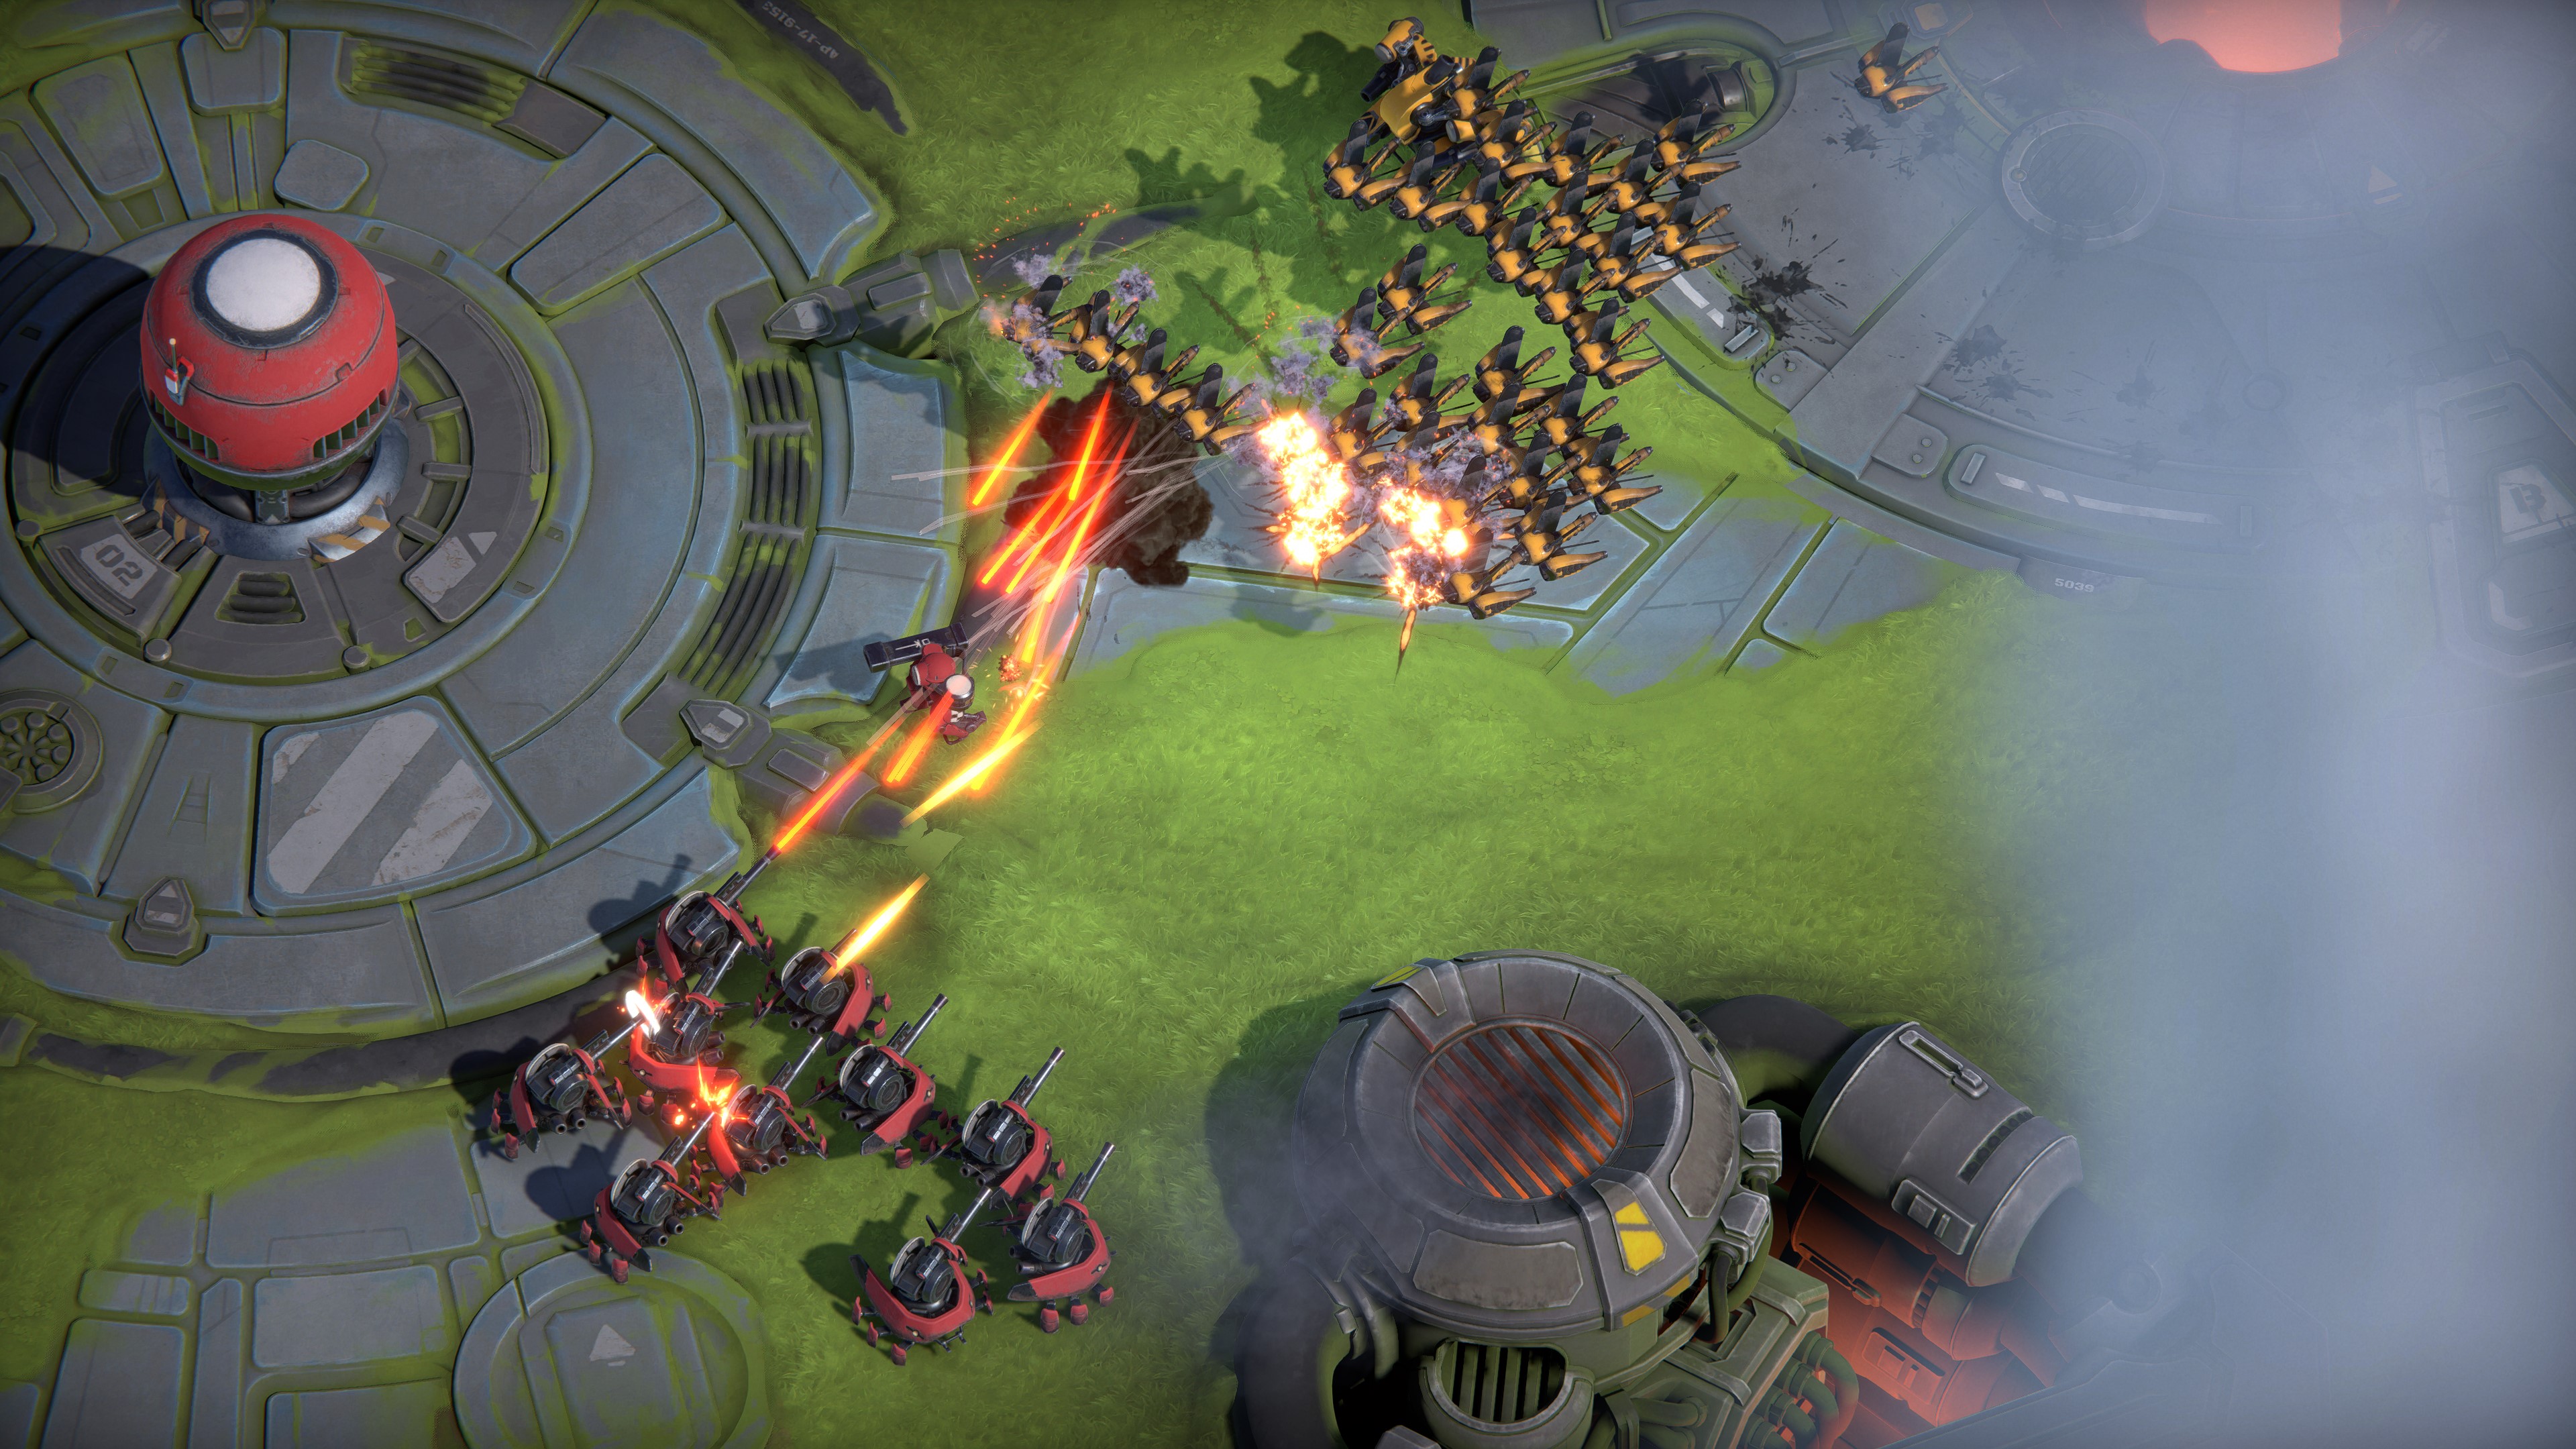 Units face off in front of a base in Battle Aces.